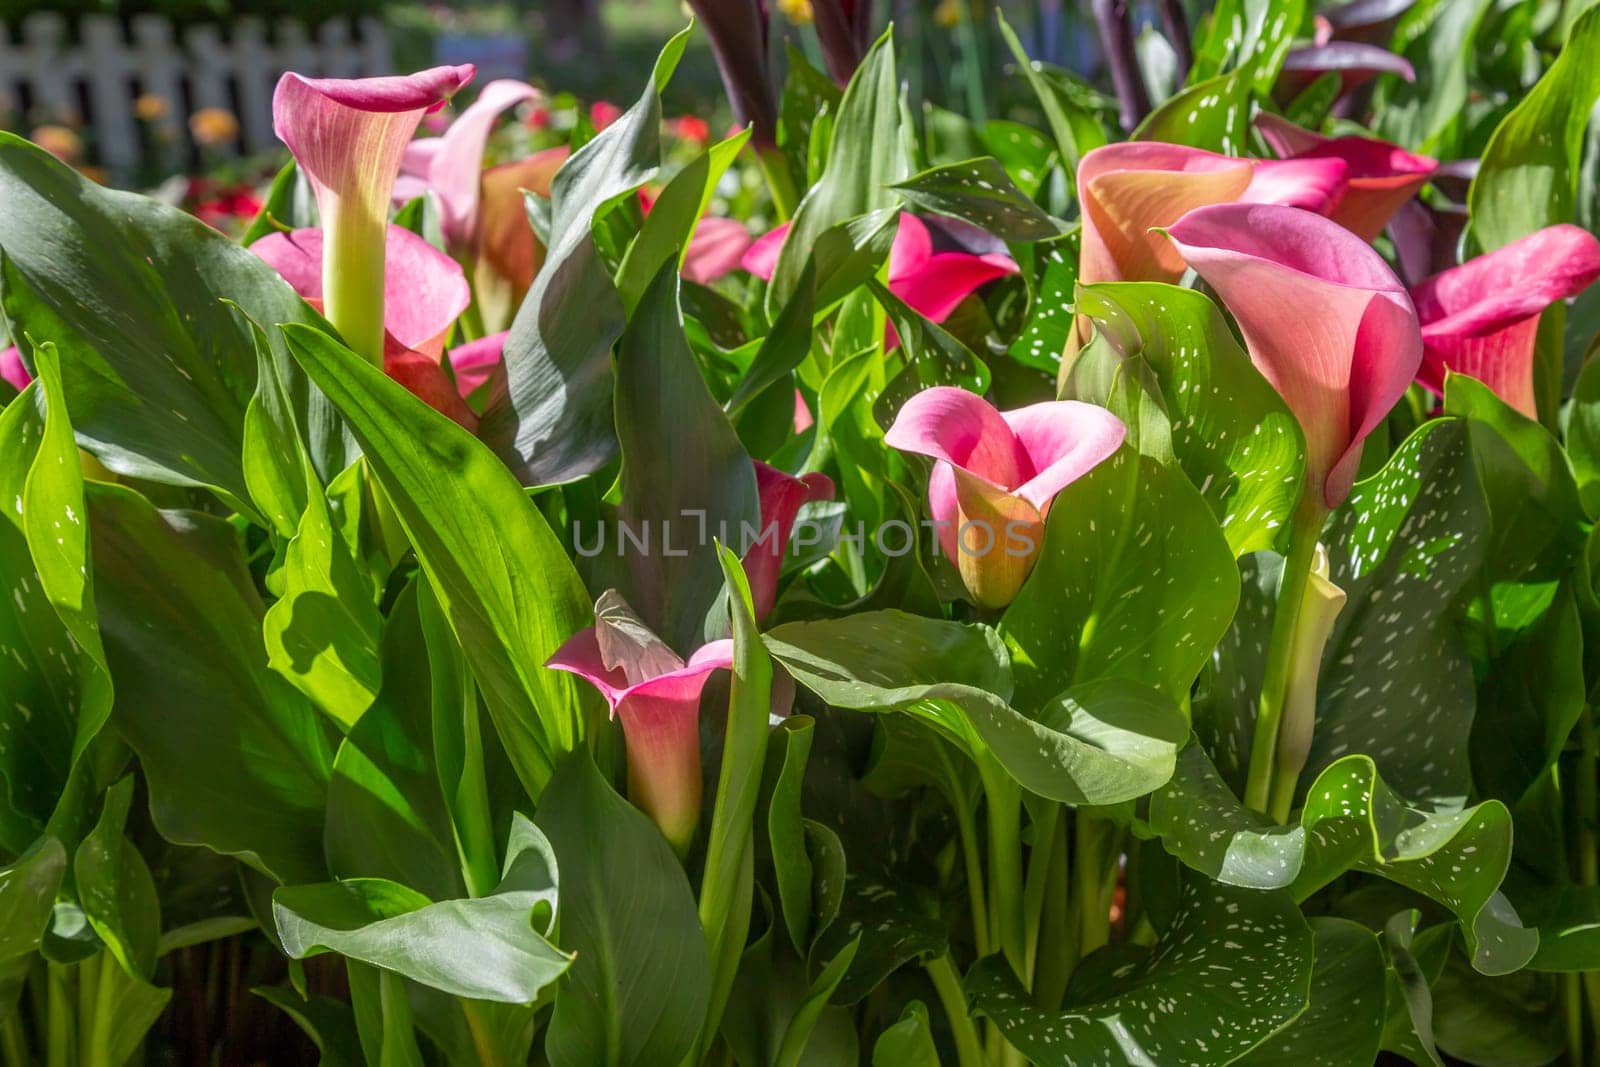 The Pink fresh calla lilly flowers on nature background by Gamjai